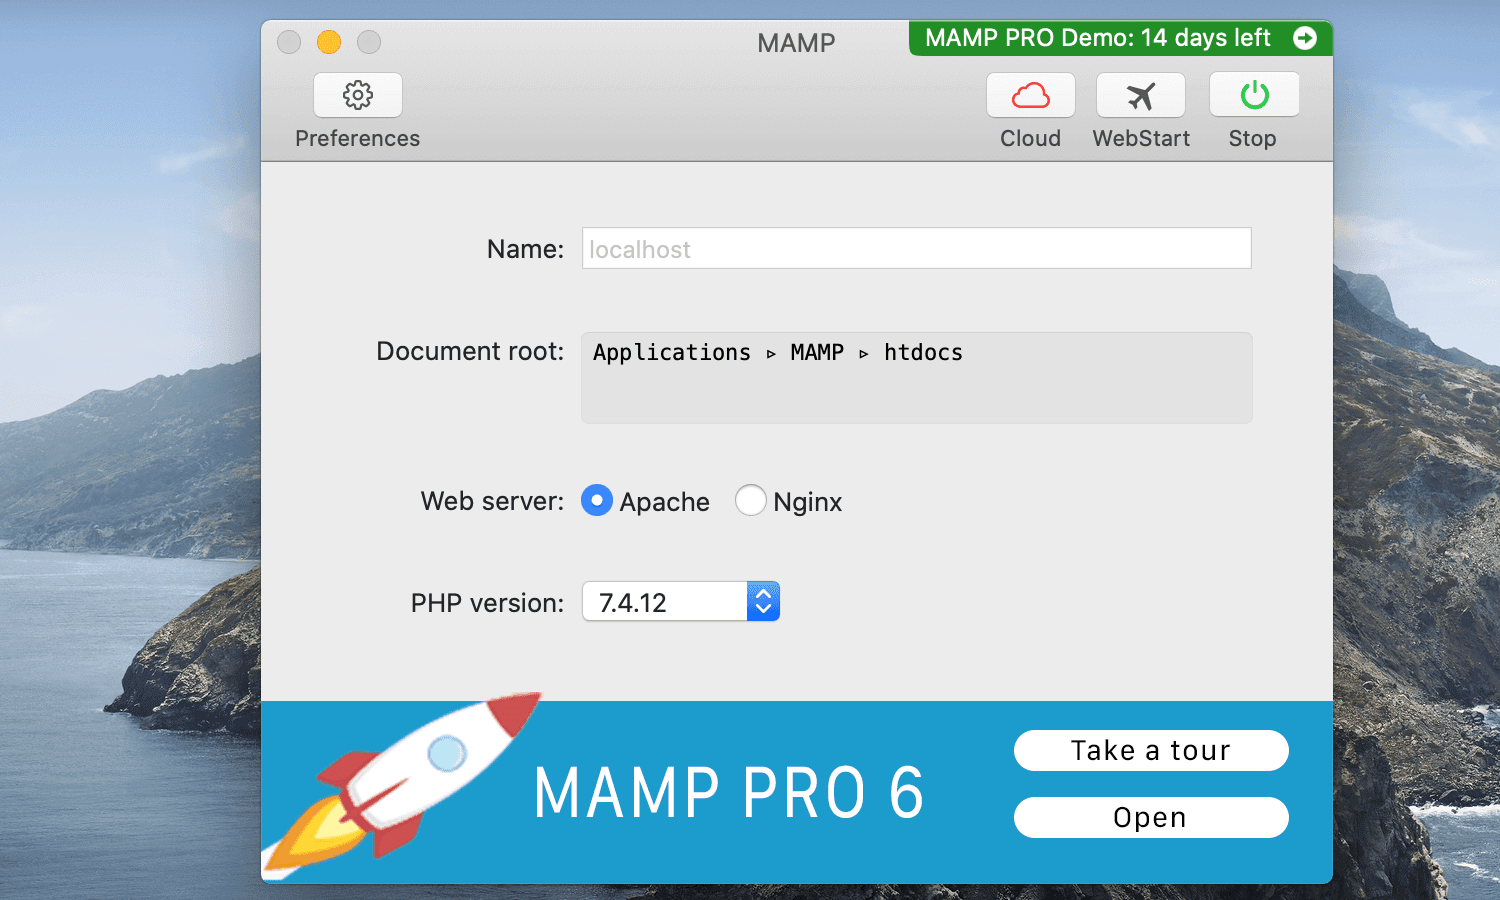 Check the MAMP document root.